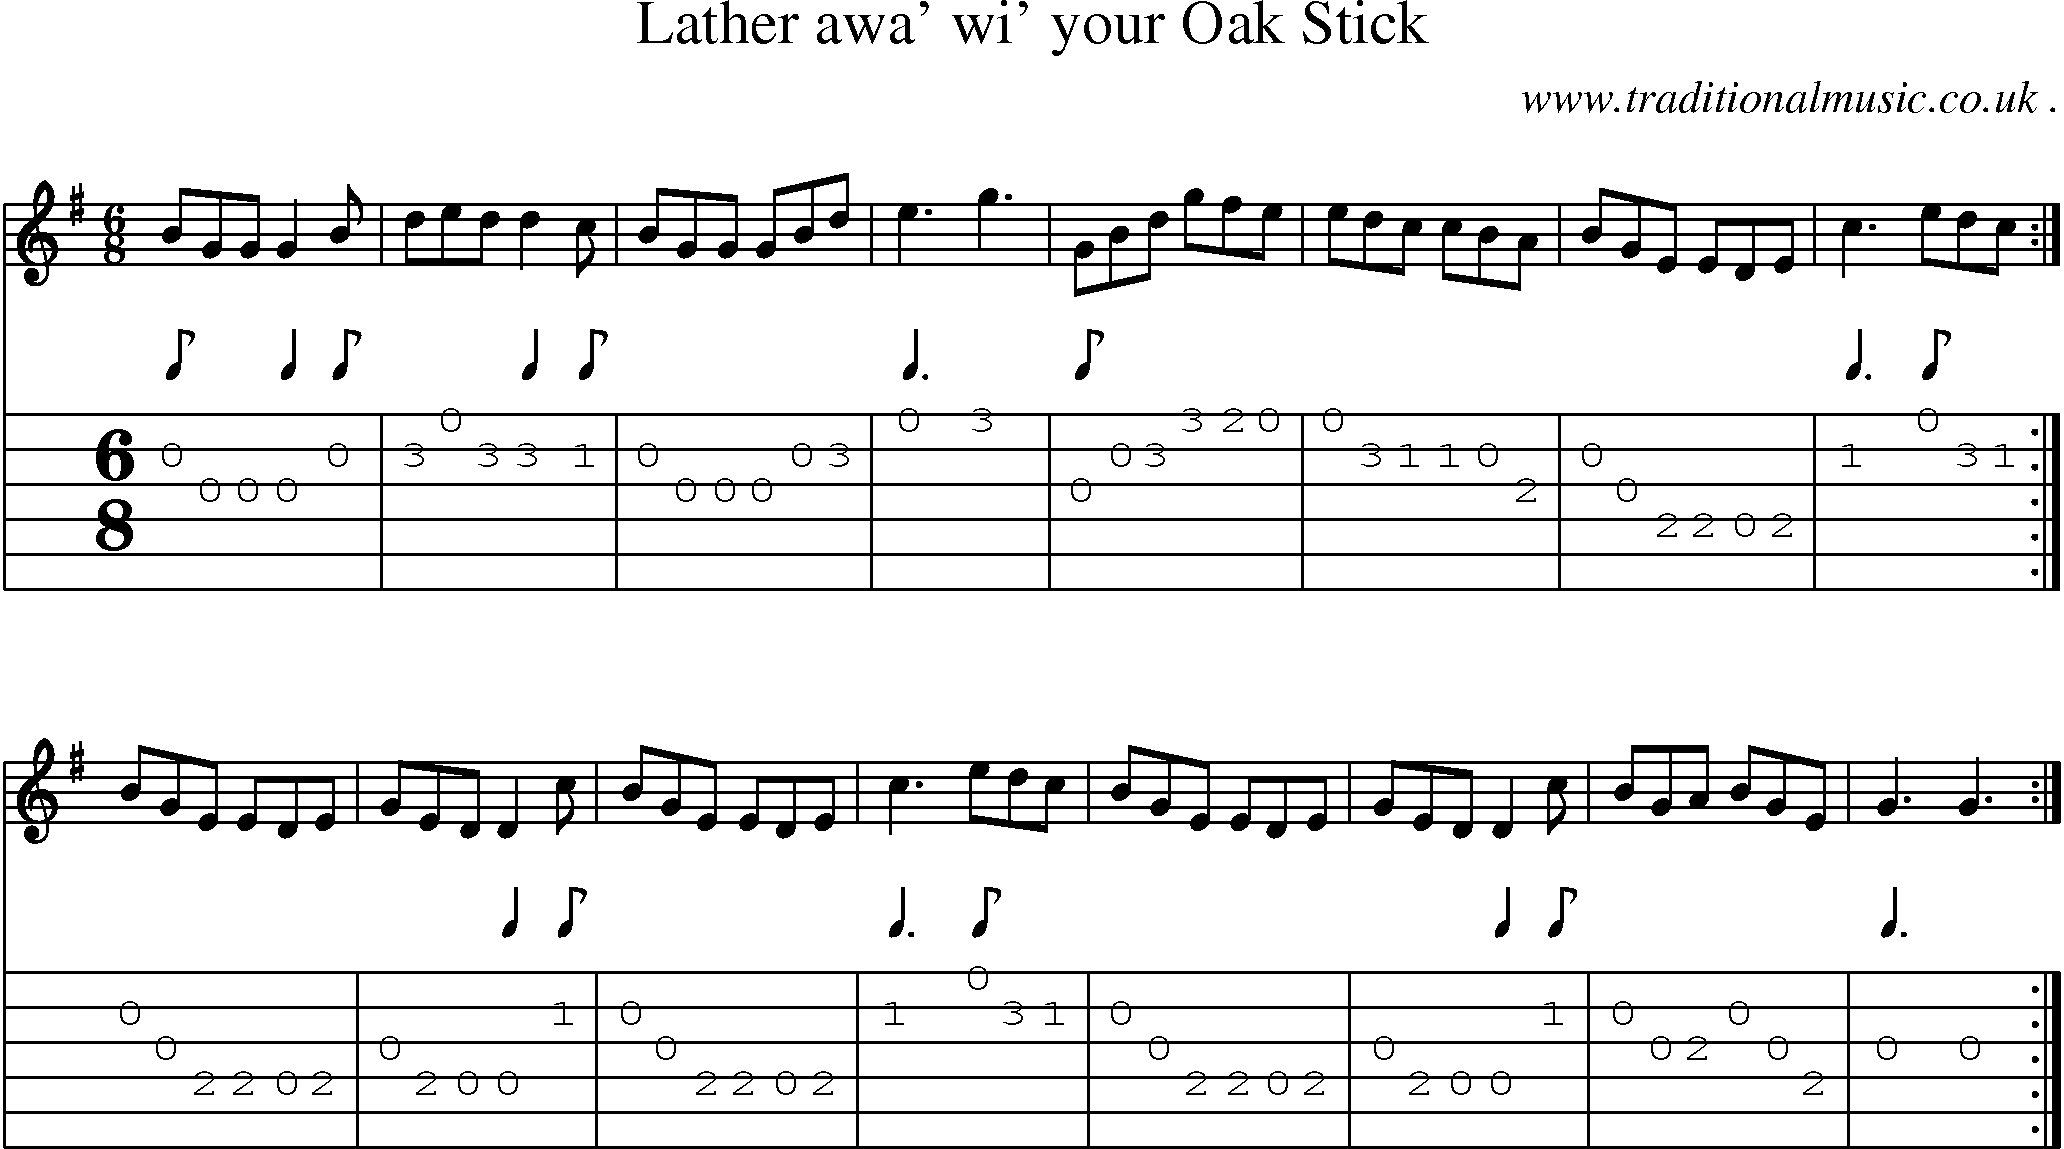 Sheet-Music and Guitar Tabs for Lather Awa Wi Your Oak Stick